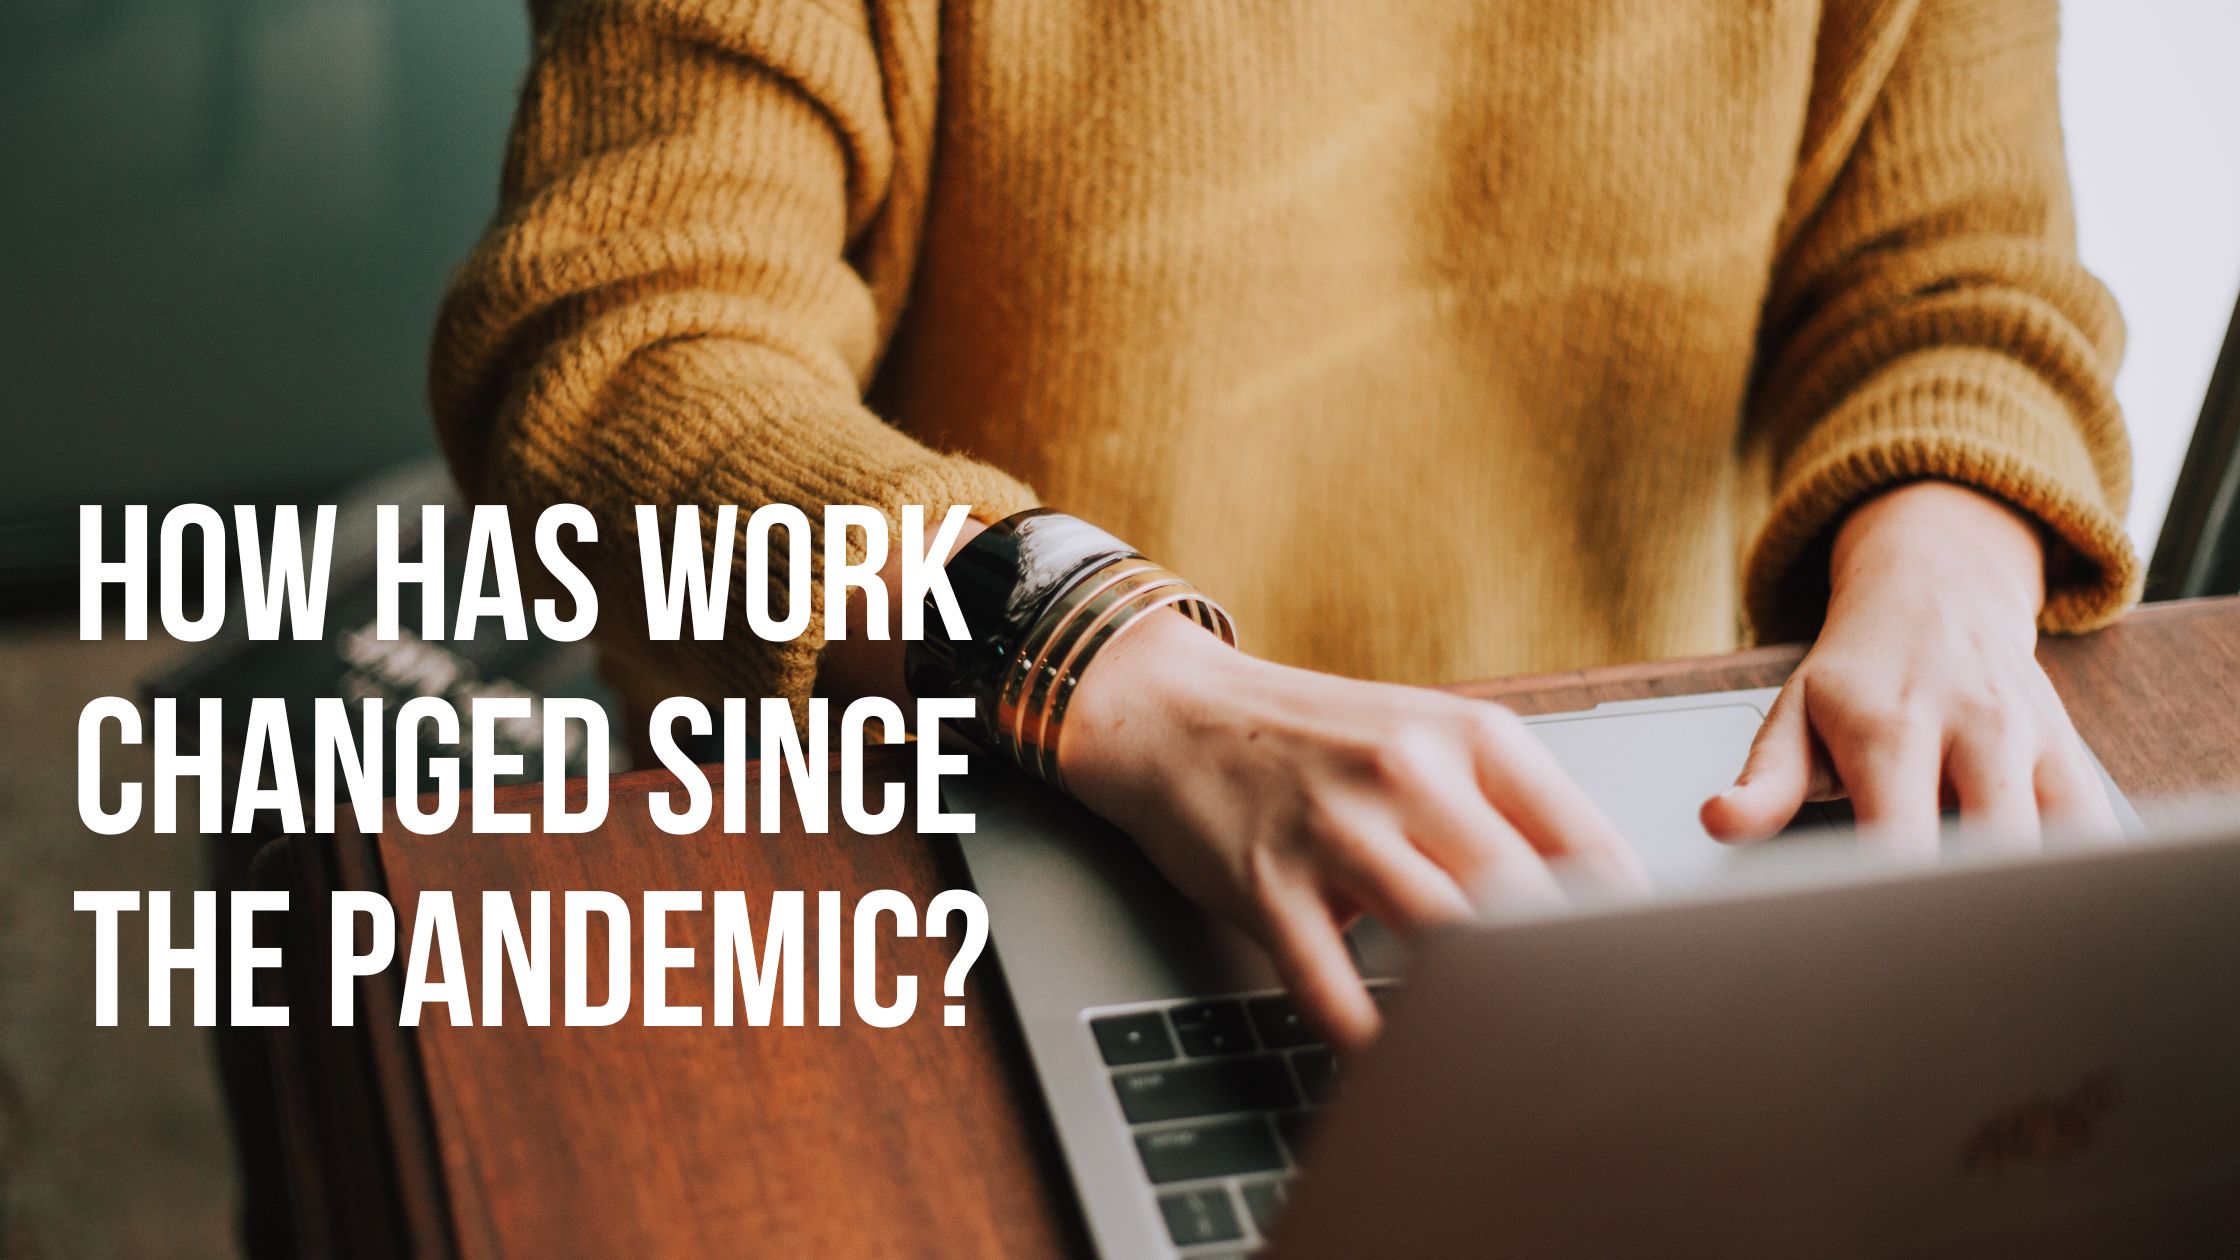 How has work changed since the pandemic?